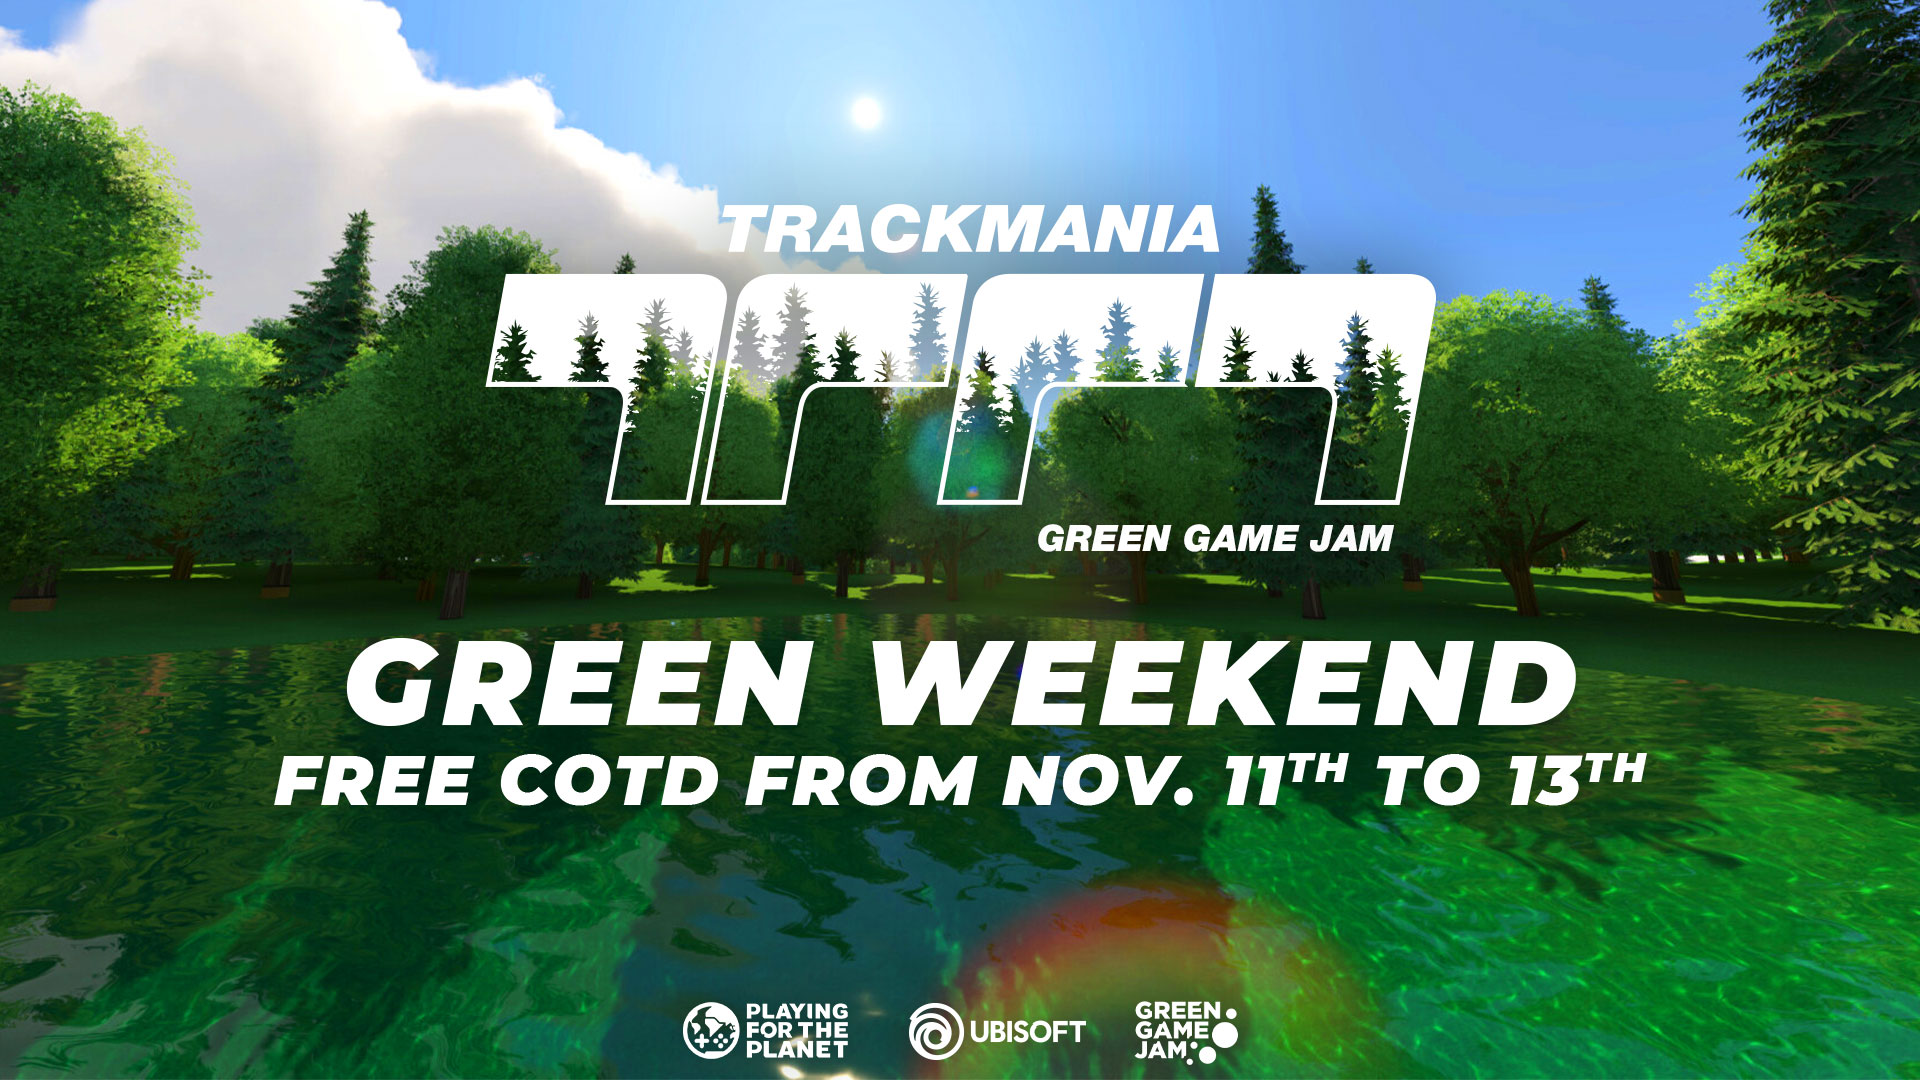 Play the Trackmania Green Weekend for free!